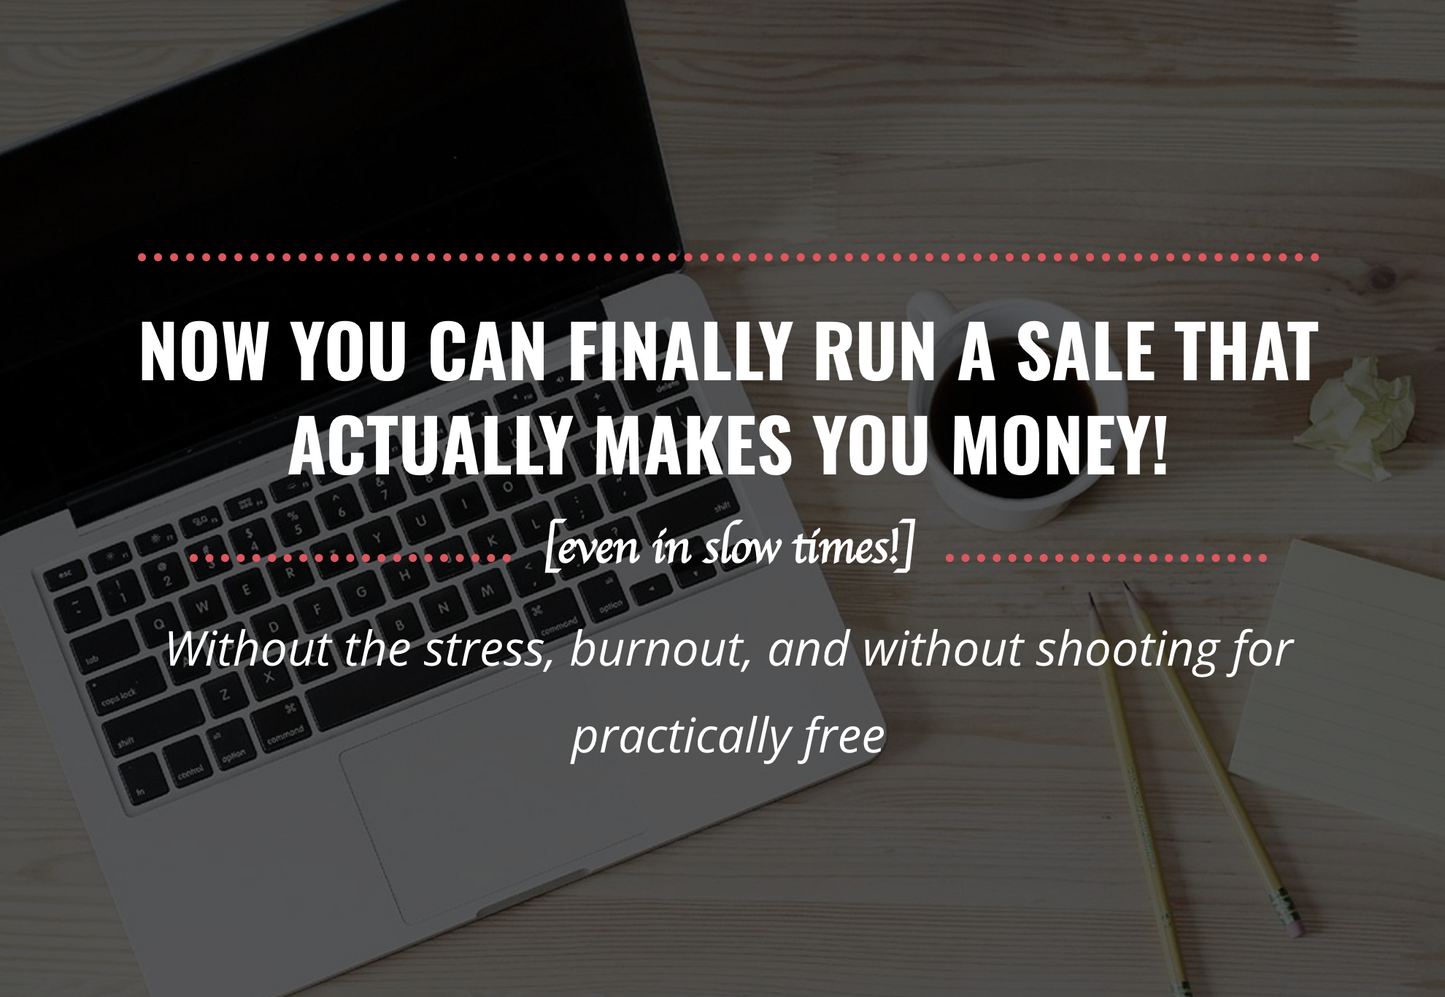 How to Run a Profitable Black Friday (or anytime) Sale